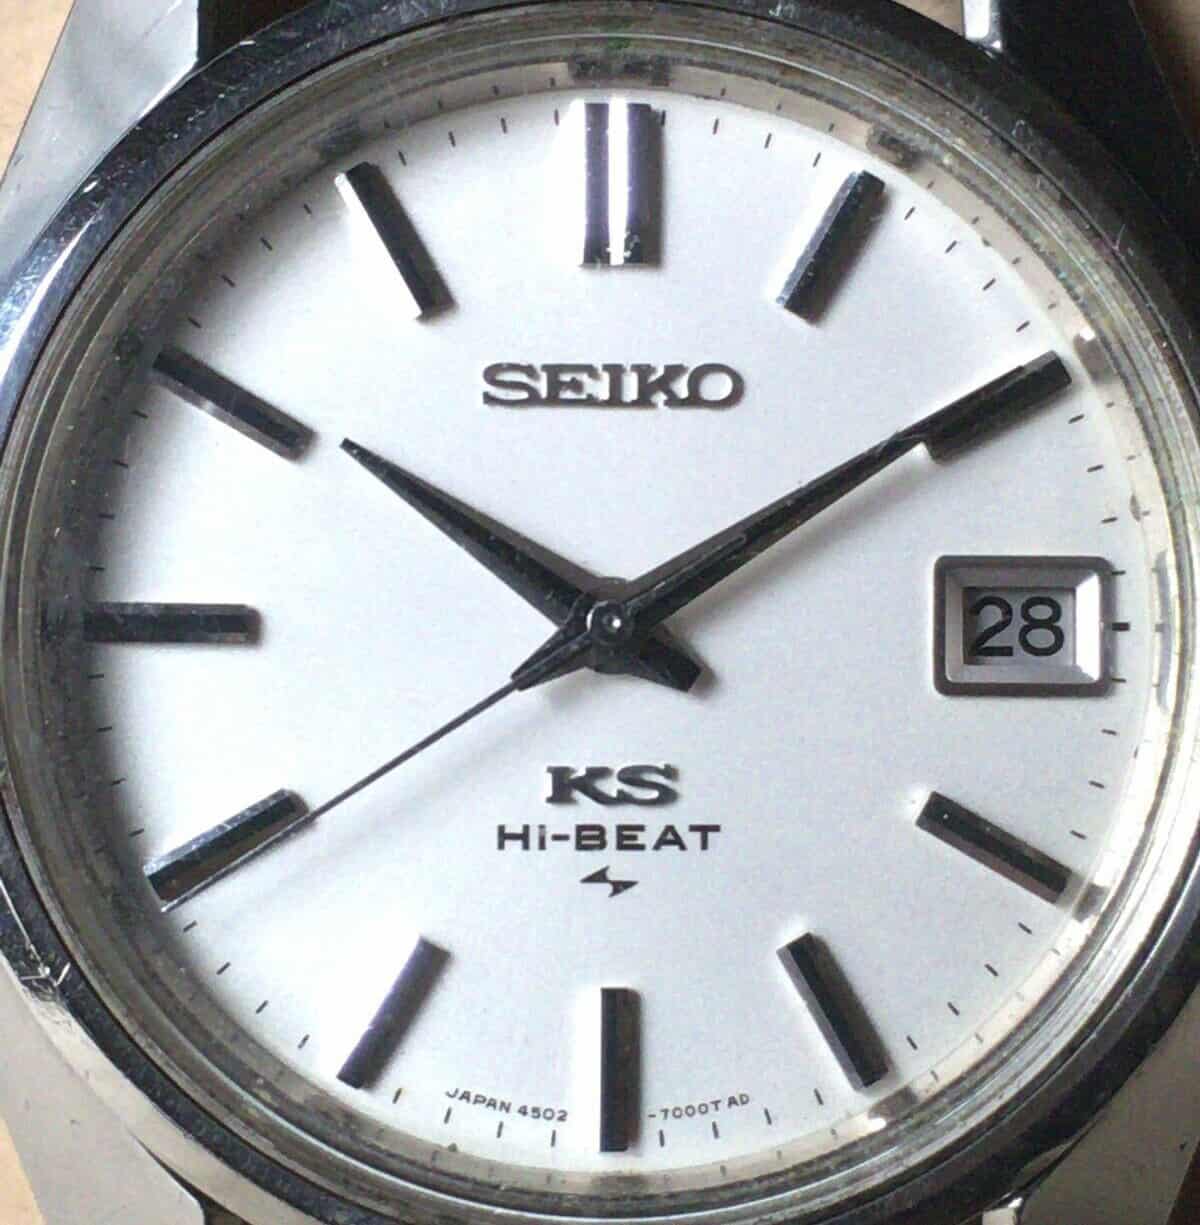 eBay Finds: Vintage Seiko Edition With a Notched Ref. 6139-6009, King Seiko  Ref. 4502-7001, and More - Worn & Wound